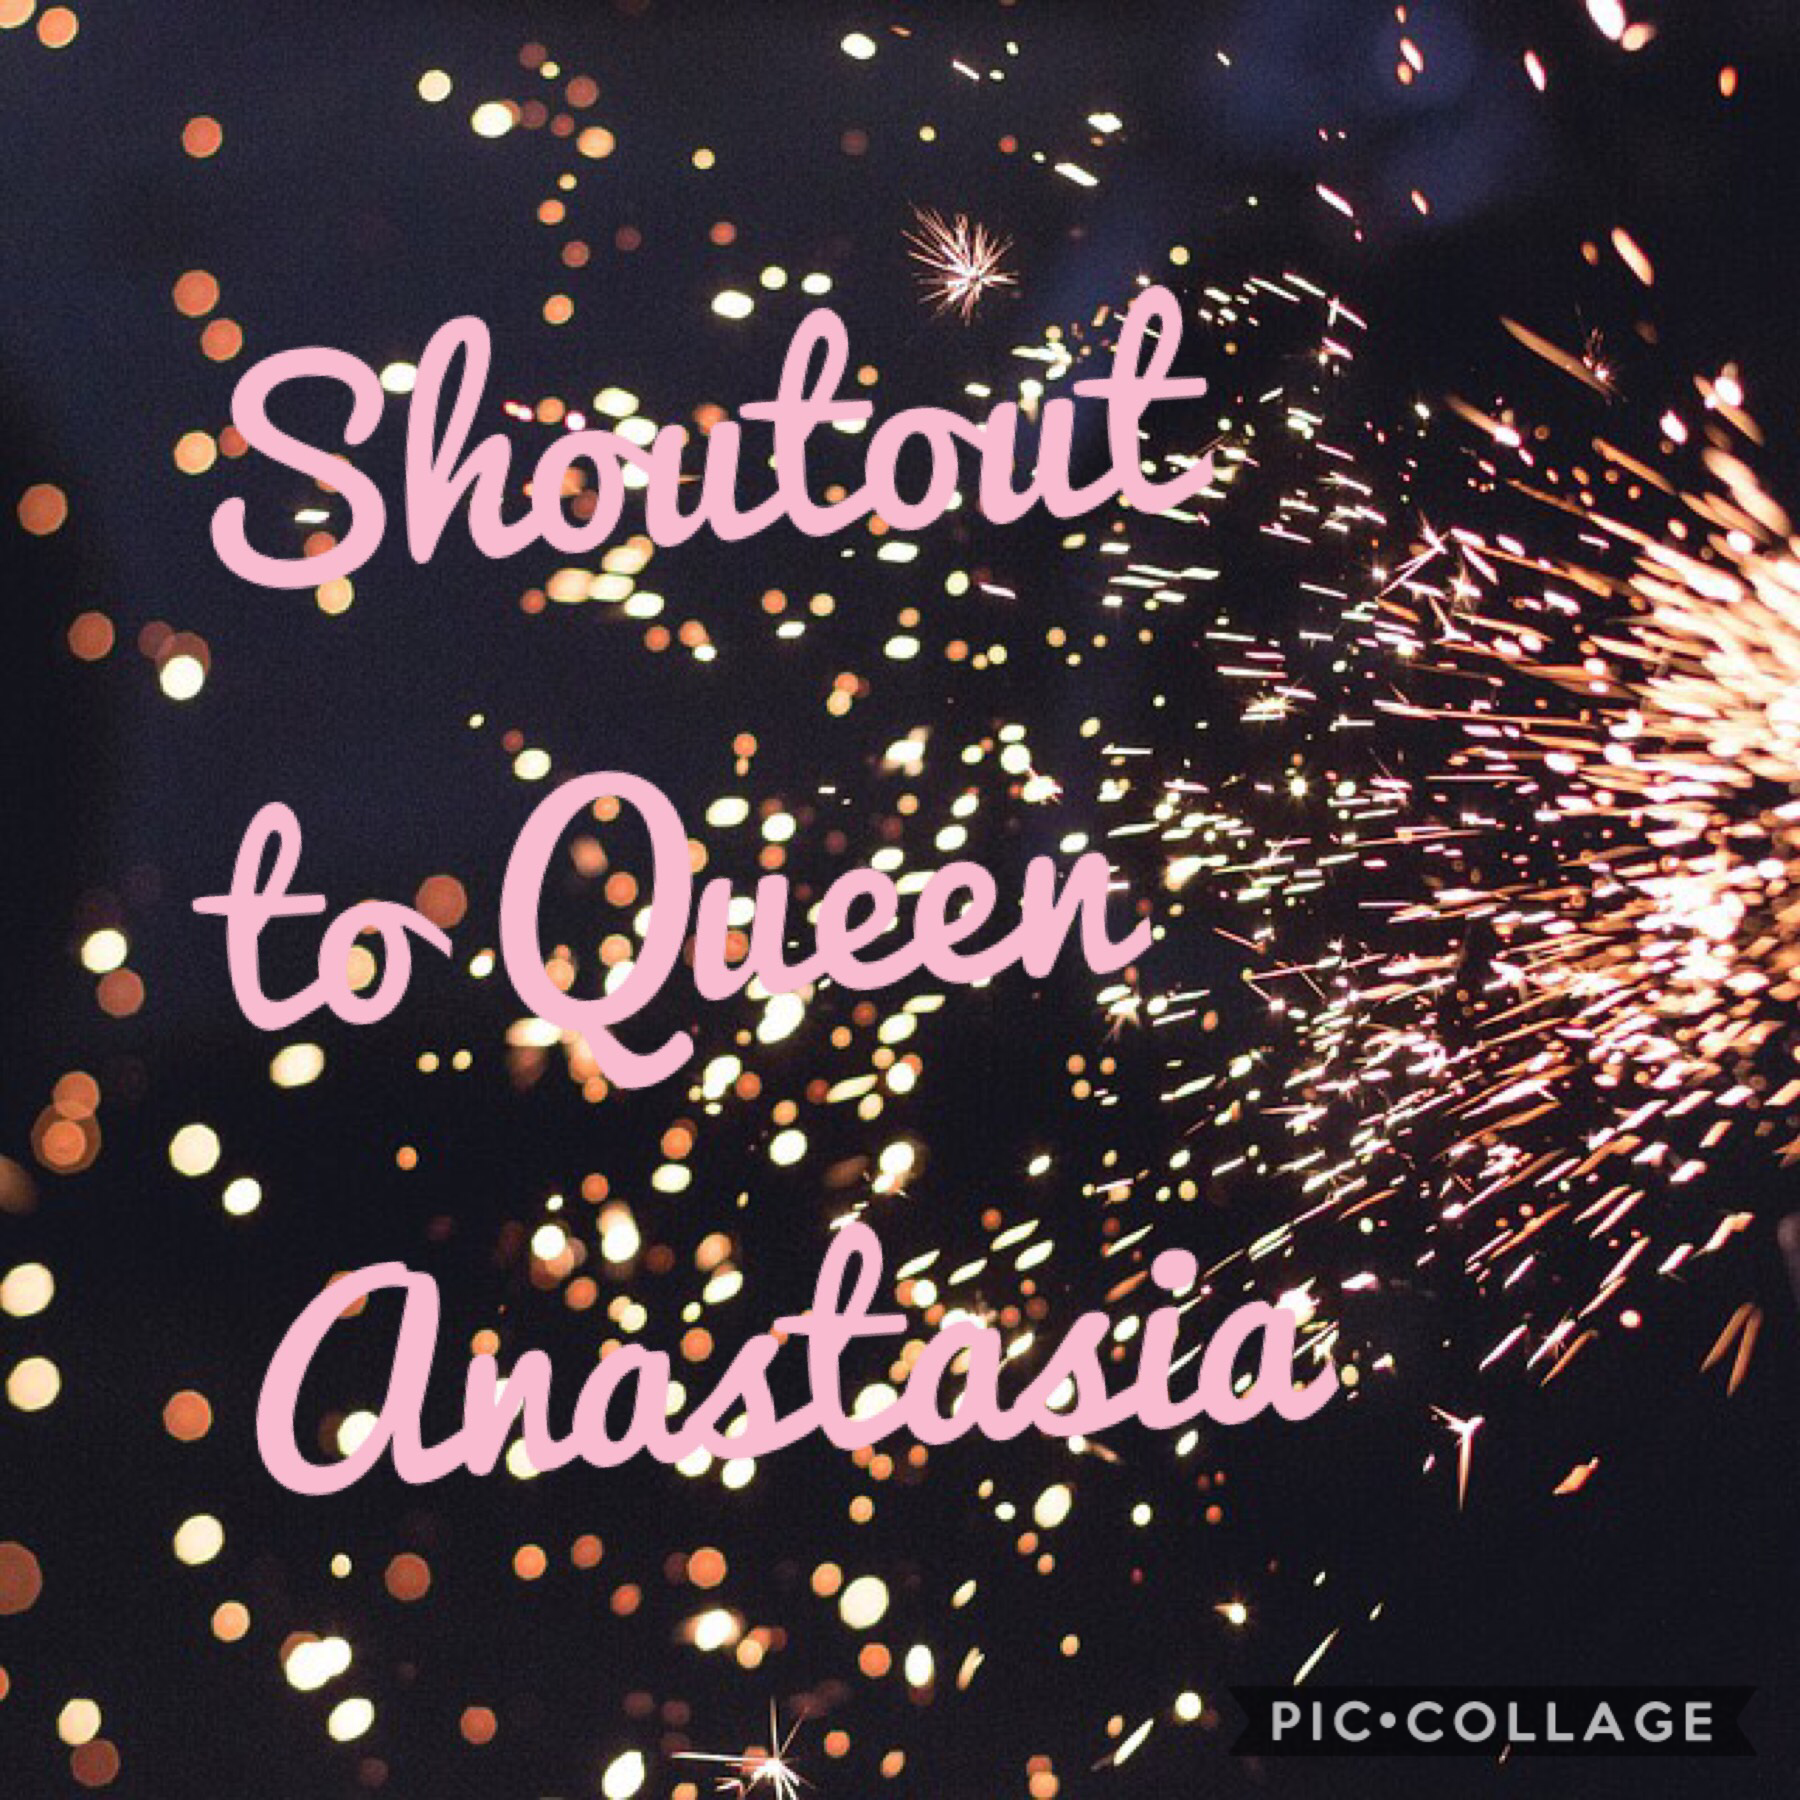 TAP💩 
Hey y’all go and follow queen Anastasia she sensed me a picture I will show you in my next pic collage love her 